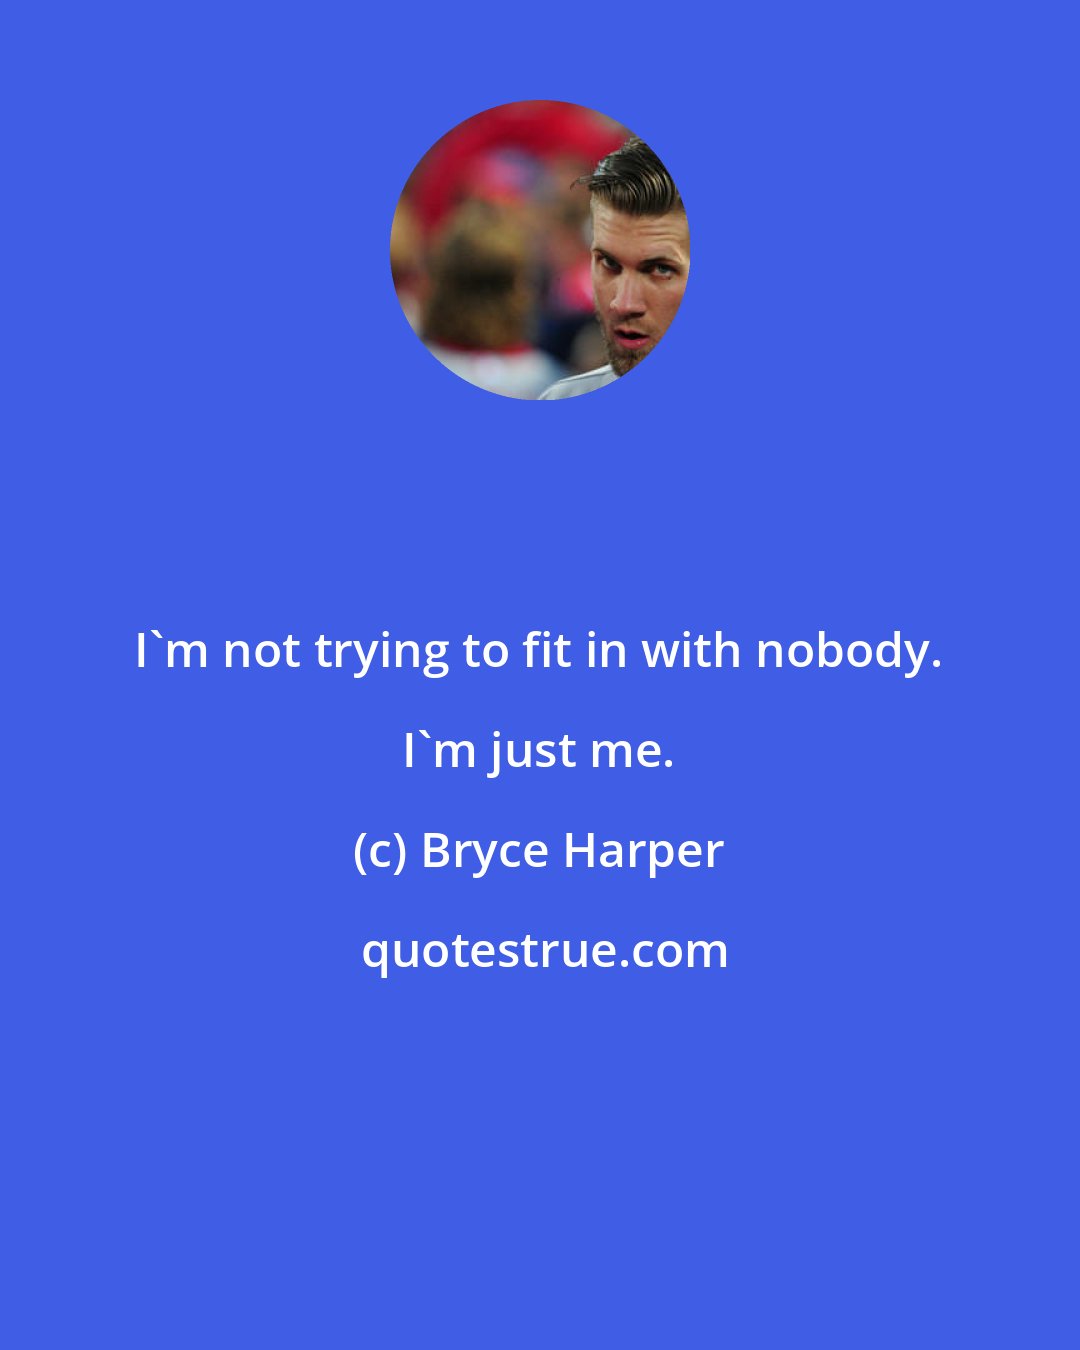 Bryce Harper: I'm not trying to fit in with nobody. I'm just me.